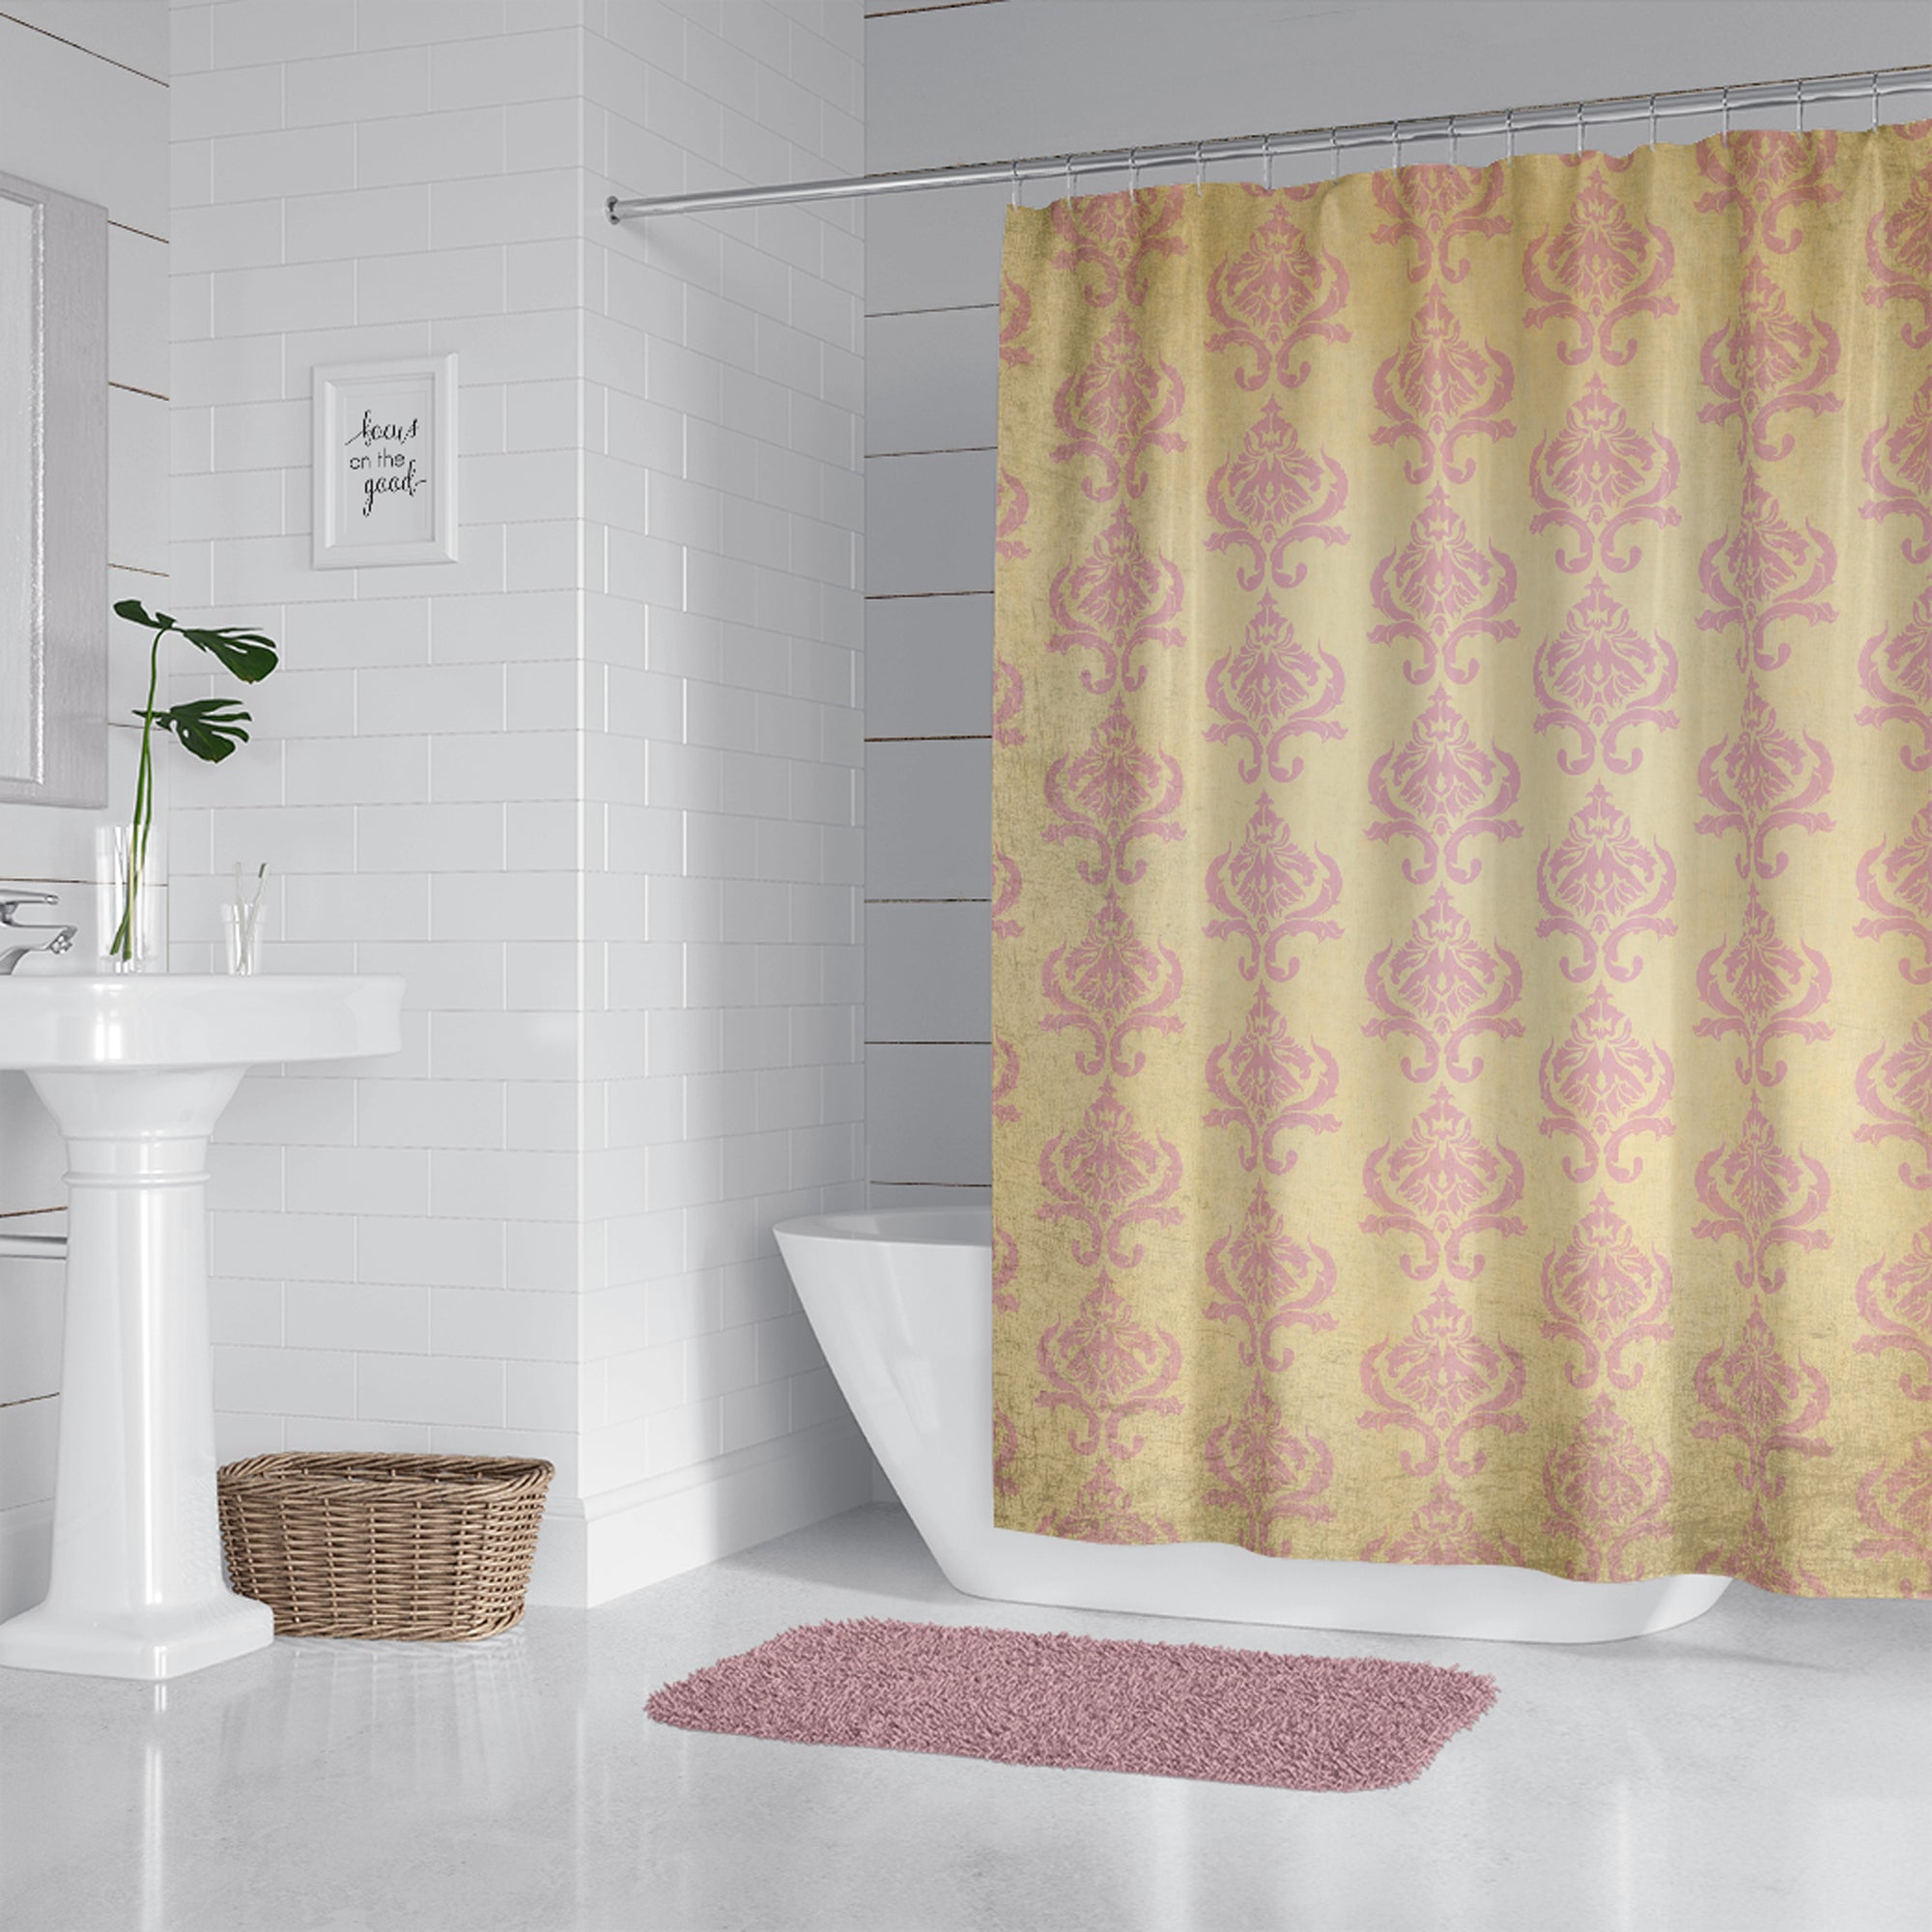 Pink and cream damask shower curtain